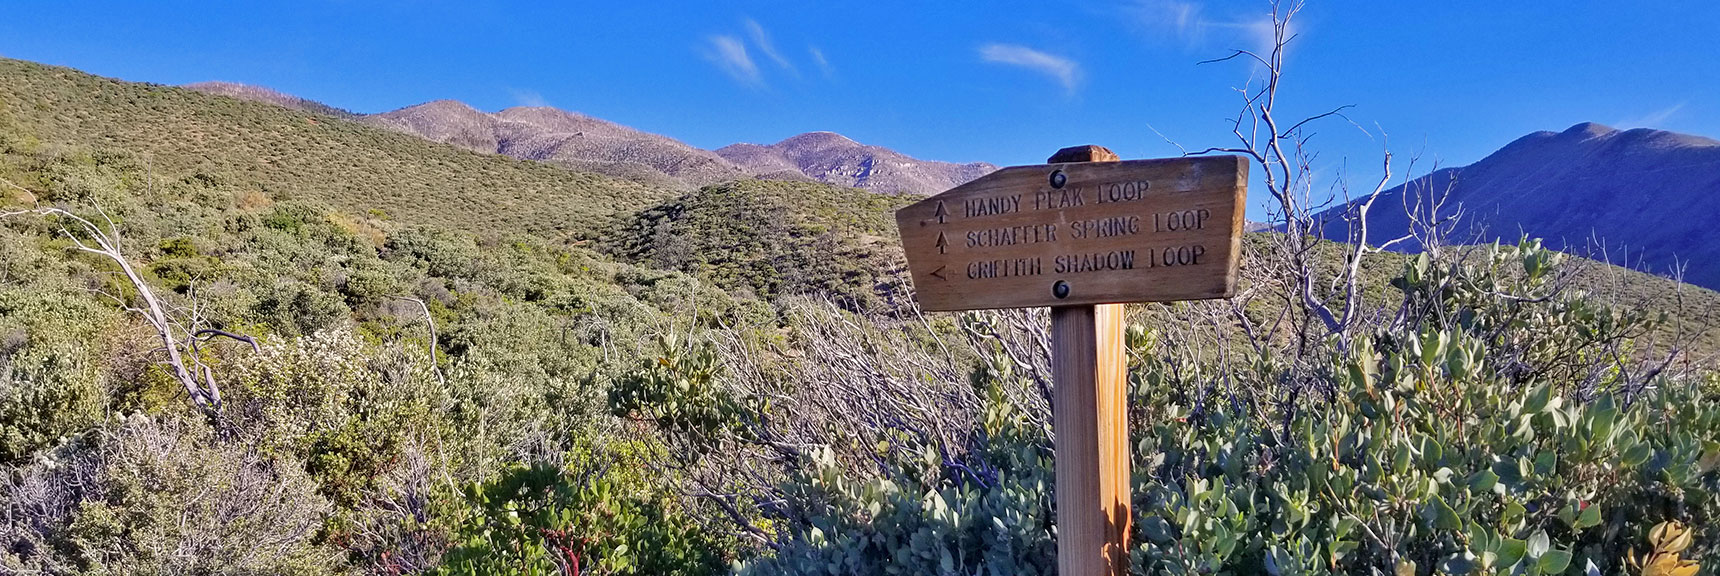 Handy Peak Loop and Schaffer Spring Loop Trails Split Off | Griffith Peak from Lovell Canyon Trailhead, Nevada, 009